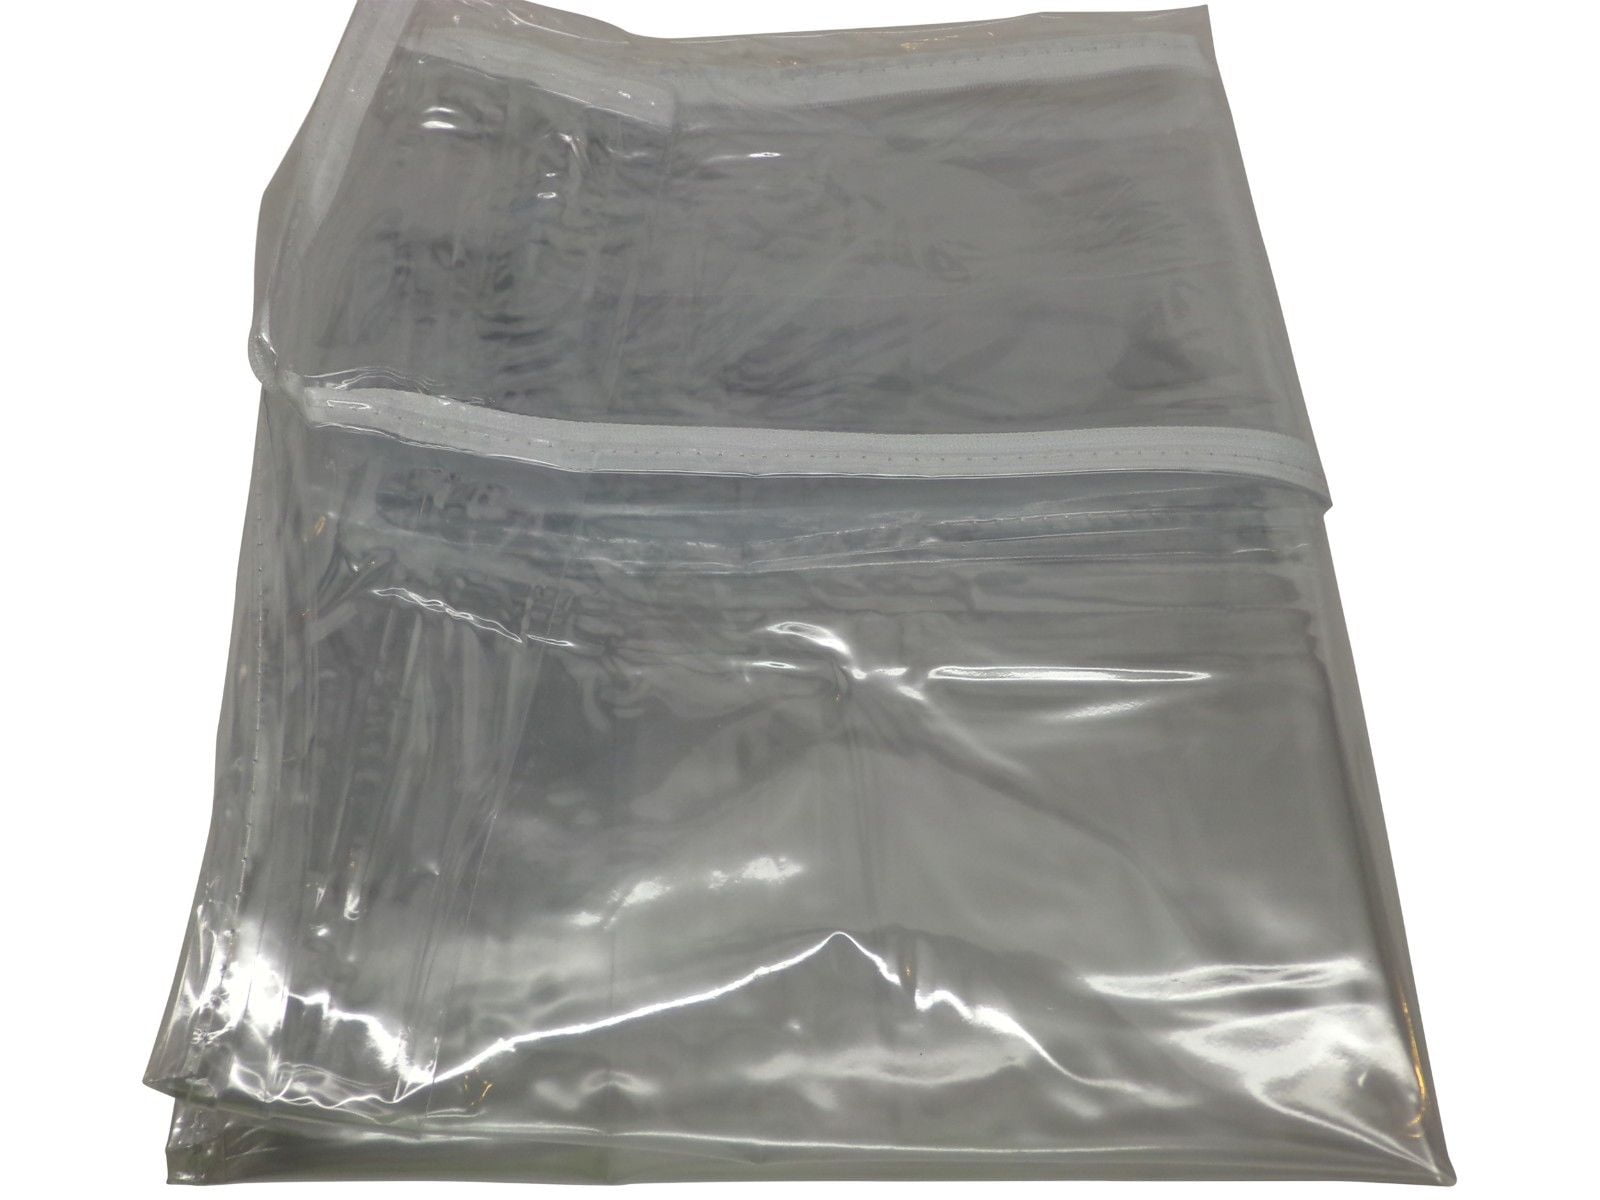  Clearware 12 Large Plastic Bags With Zipper Top - 3 Gallon Bags  16 x 18, Extra Large Storage Bags for Clothes, Travel, Moving, Large  Reusable freezer bags, BPA-Free, 2-mil Thick Clear